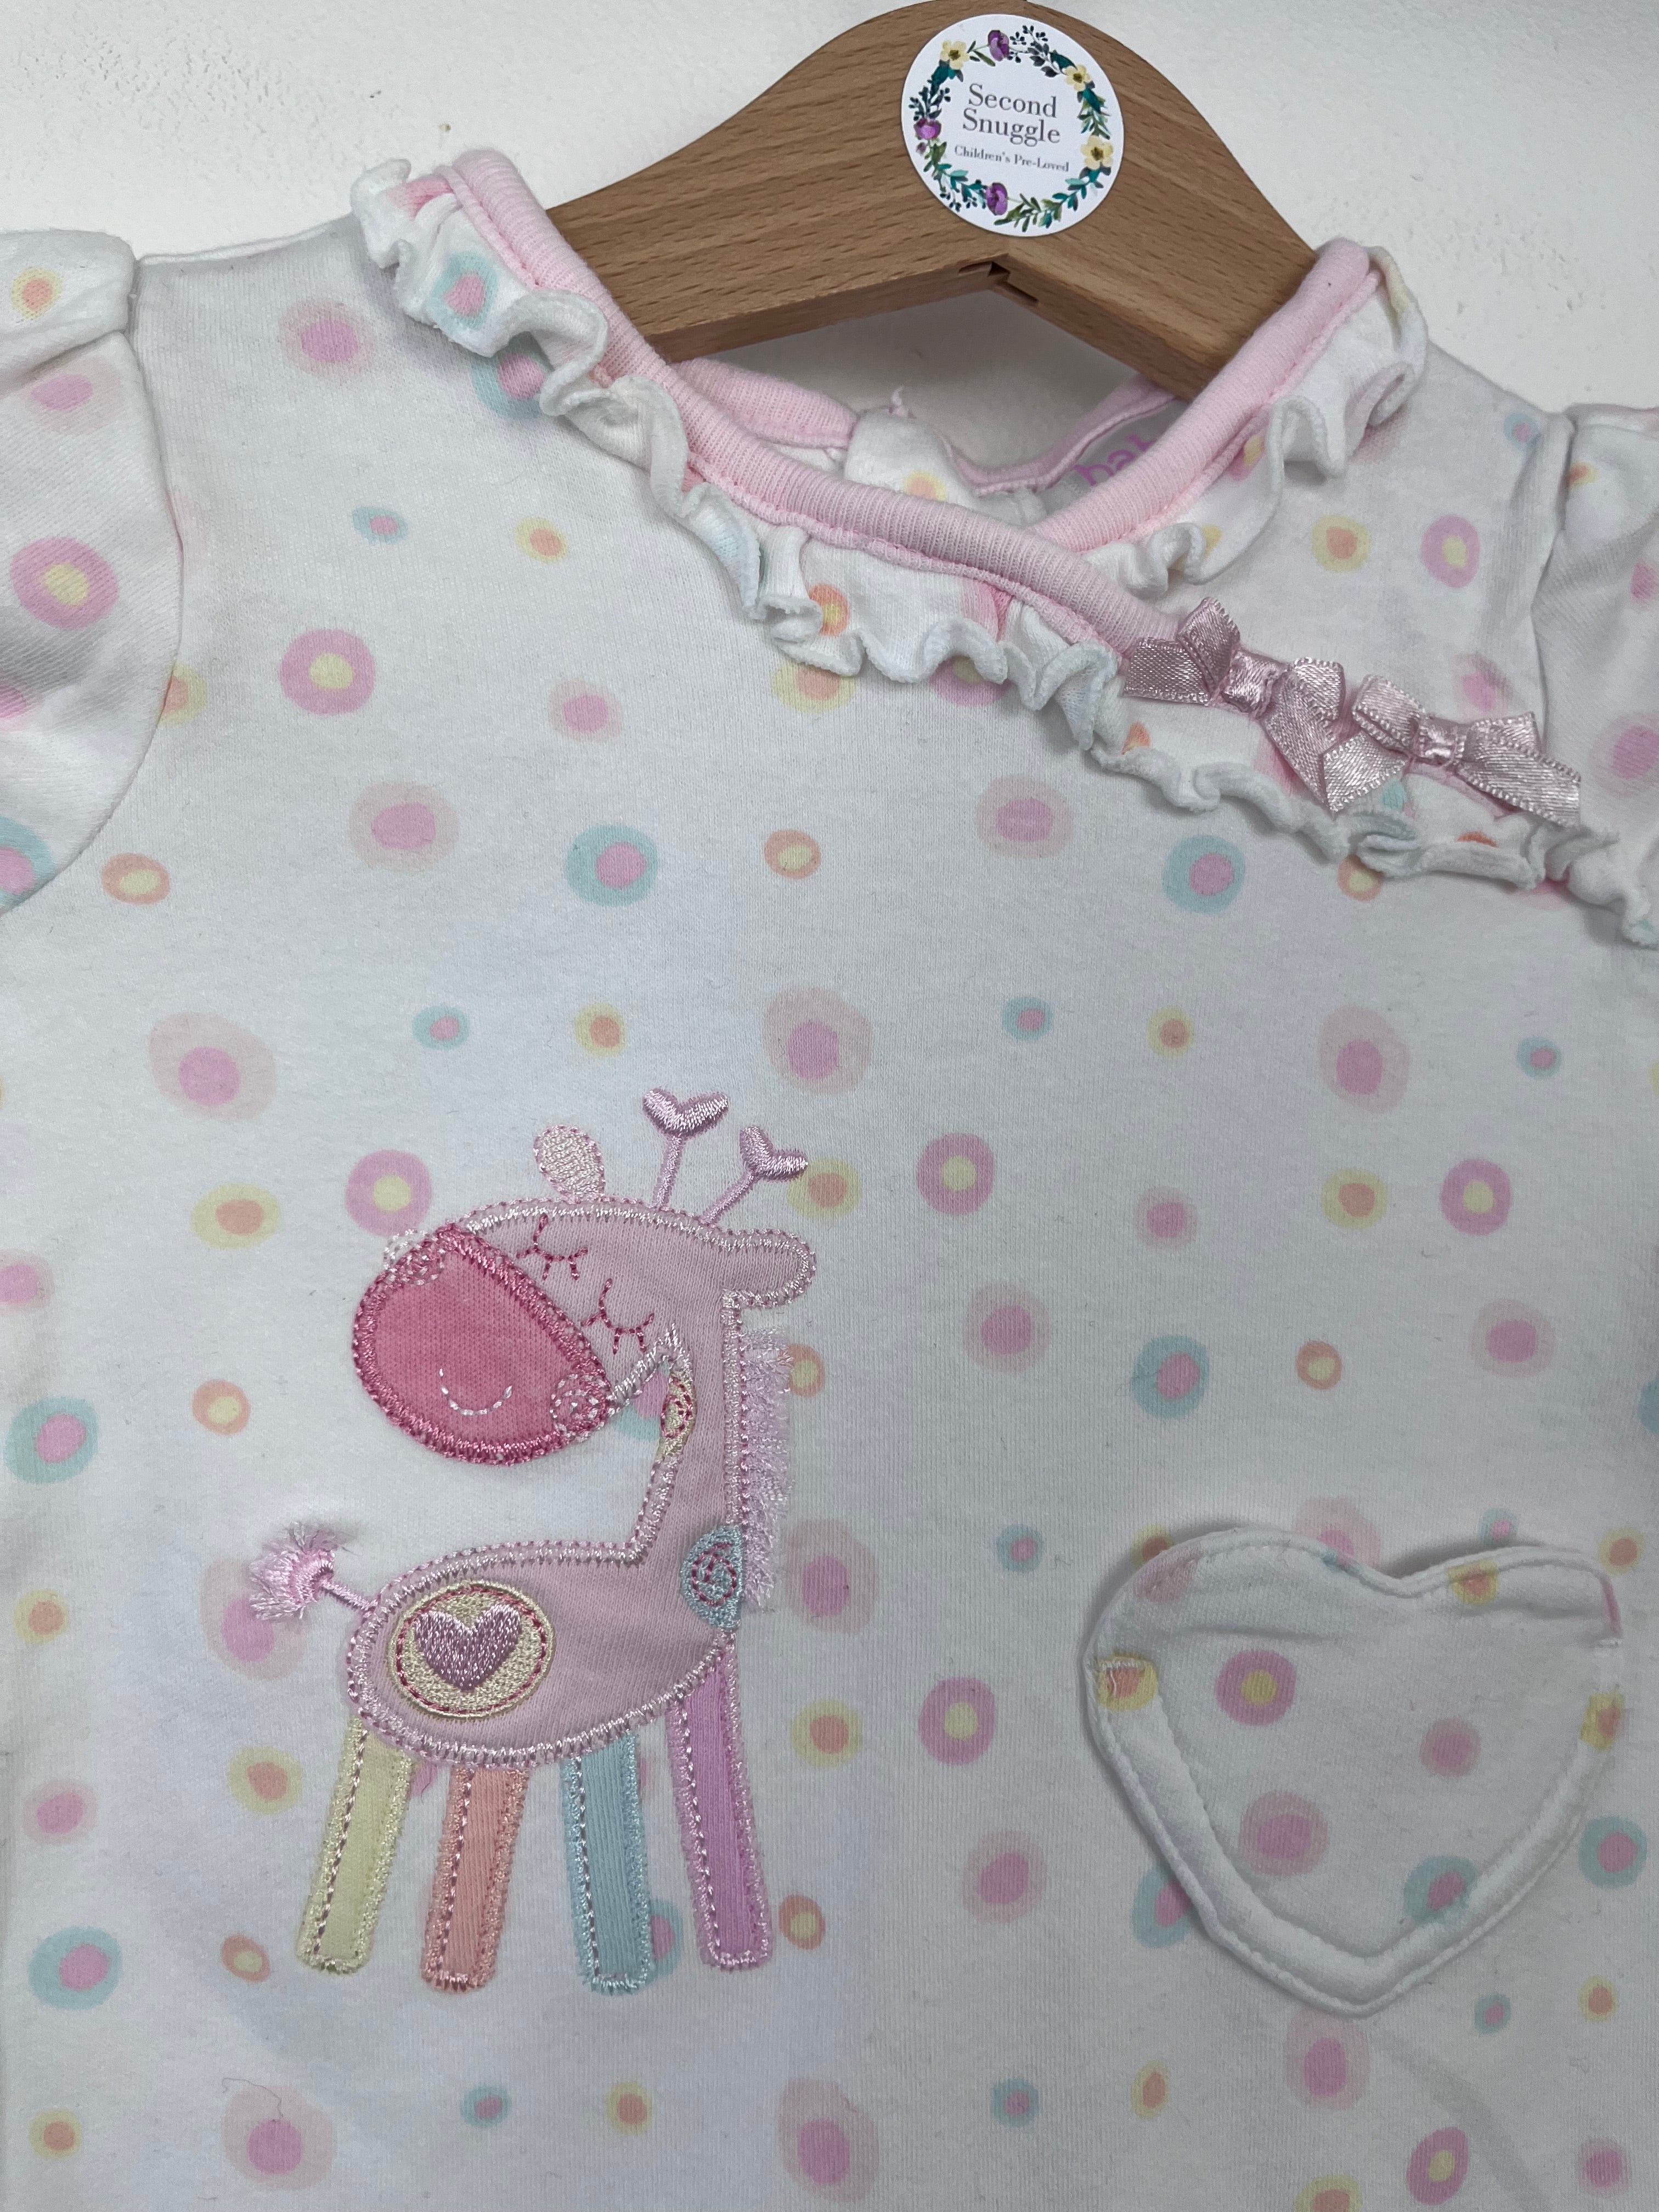 Baby Pink Early Baby up to 7lbs-Rompers-Second Snuggle Preloved